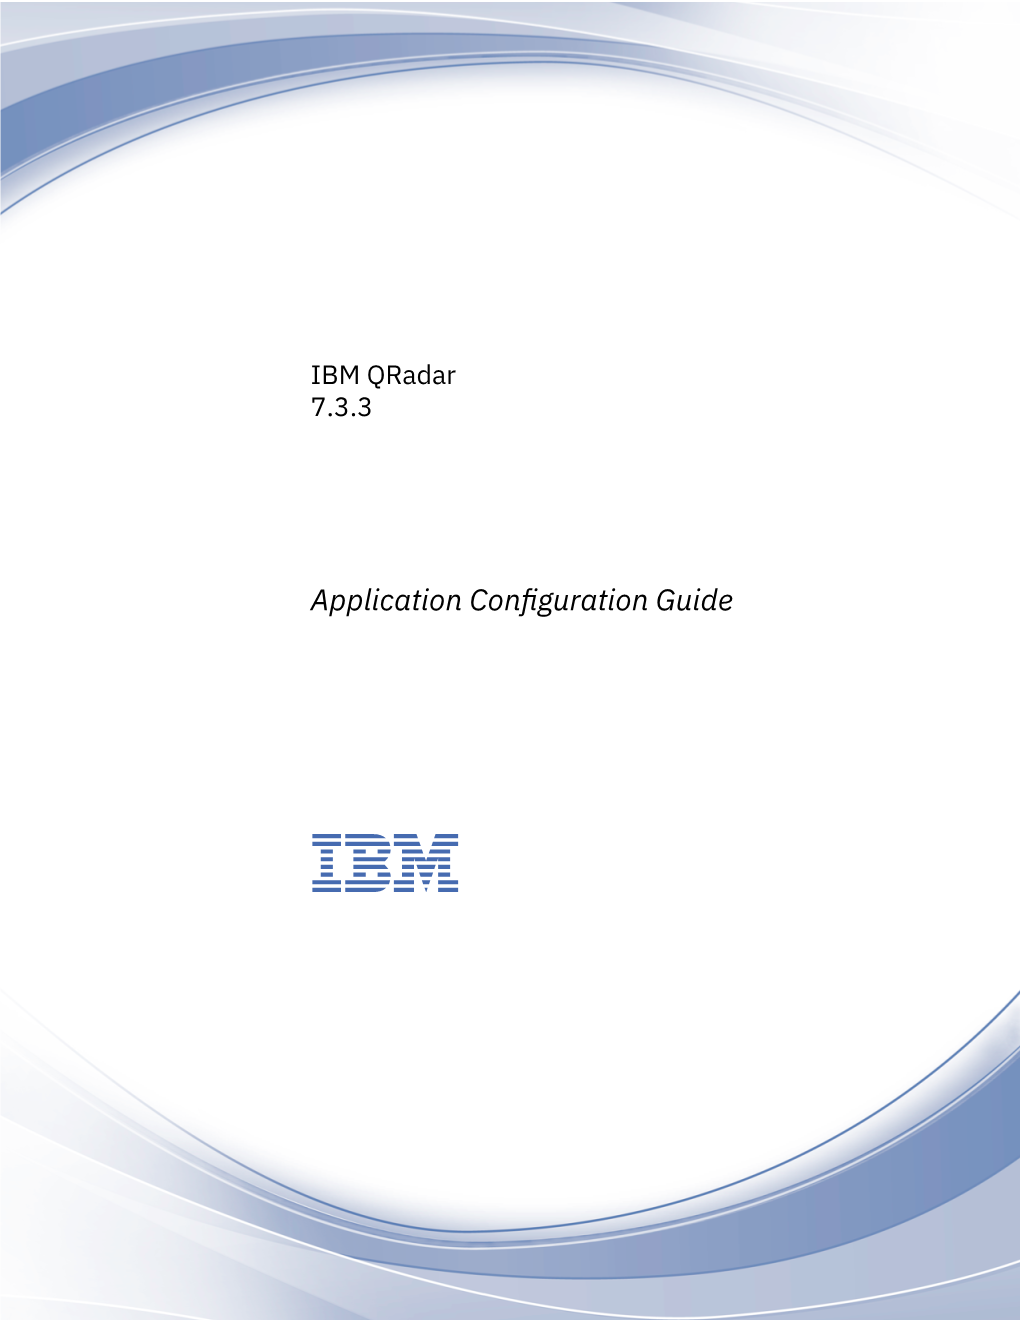 Qradar Application Configuration Guide Provides You with Information About How to Configure Application Mappings